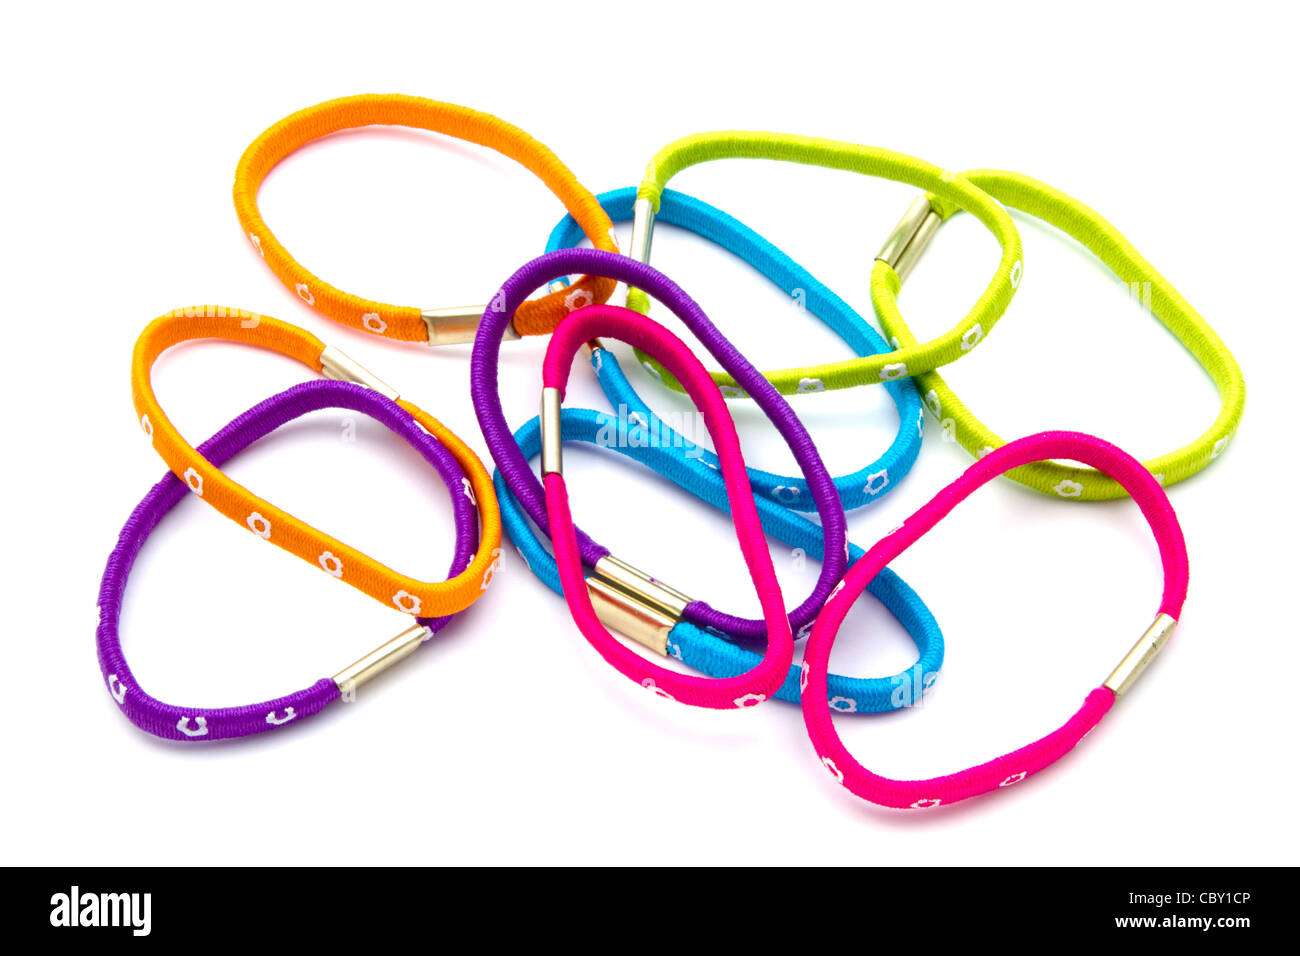 Colorful rubber bands isolated on white background Stock Photo